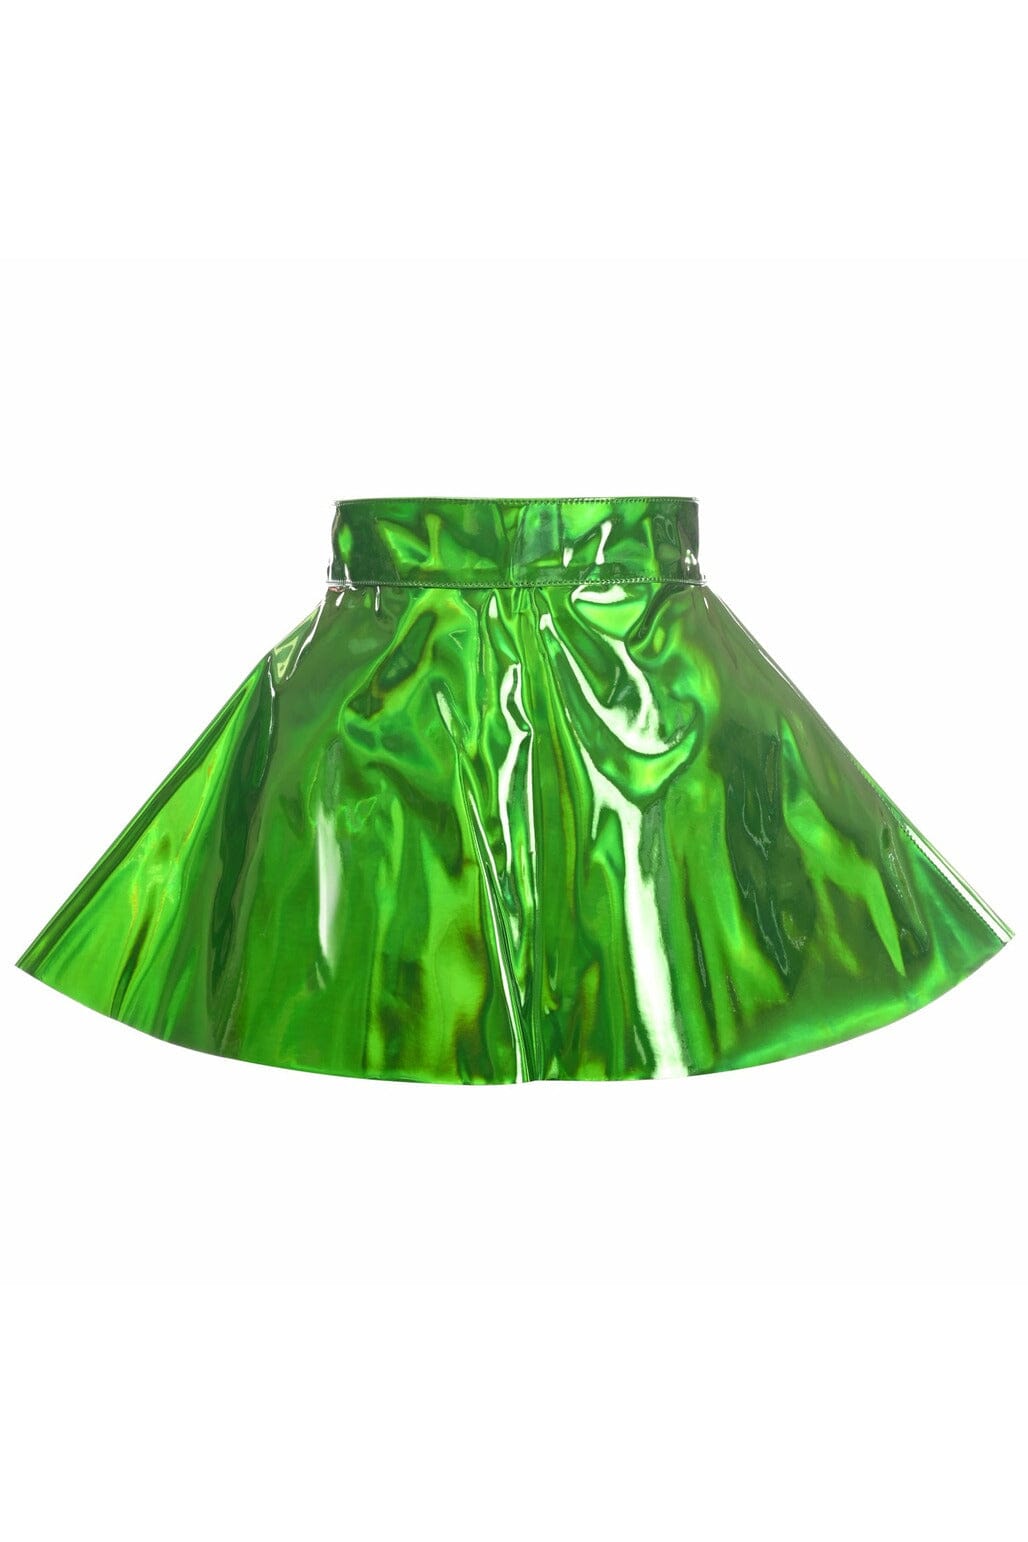 Green Holo Skater Skirt-Mini Skirts-Daisy Corsets-Green-S-SEXYSHOES.COM